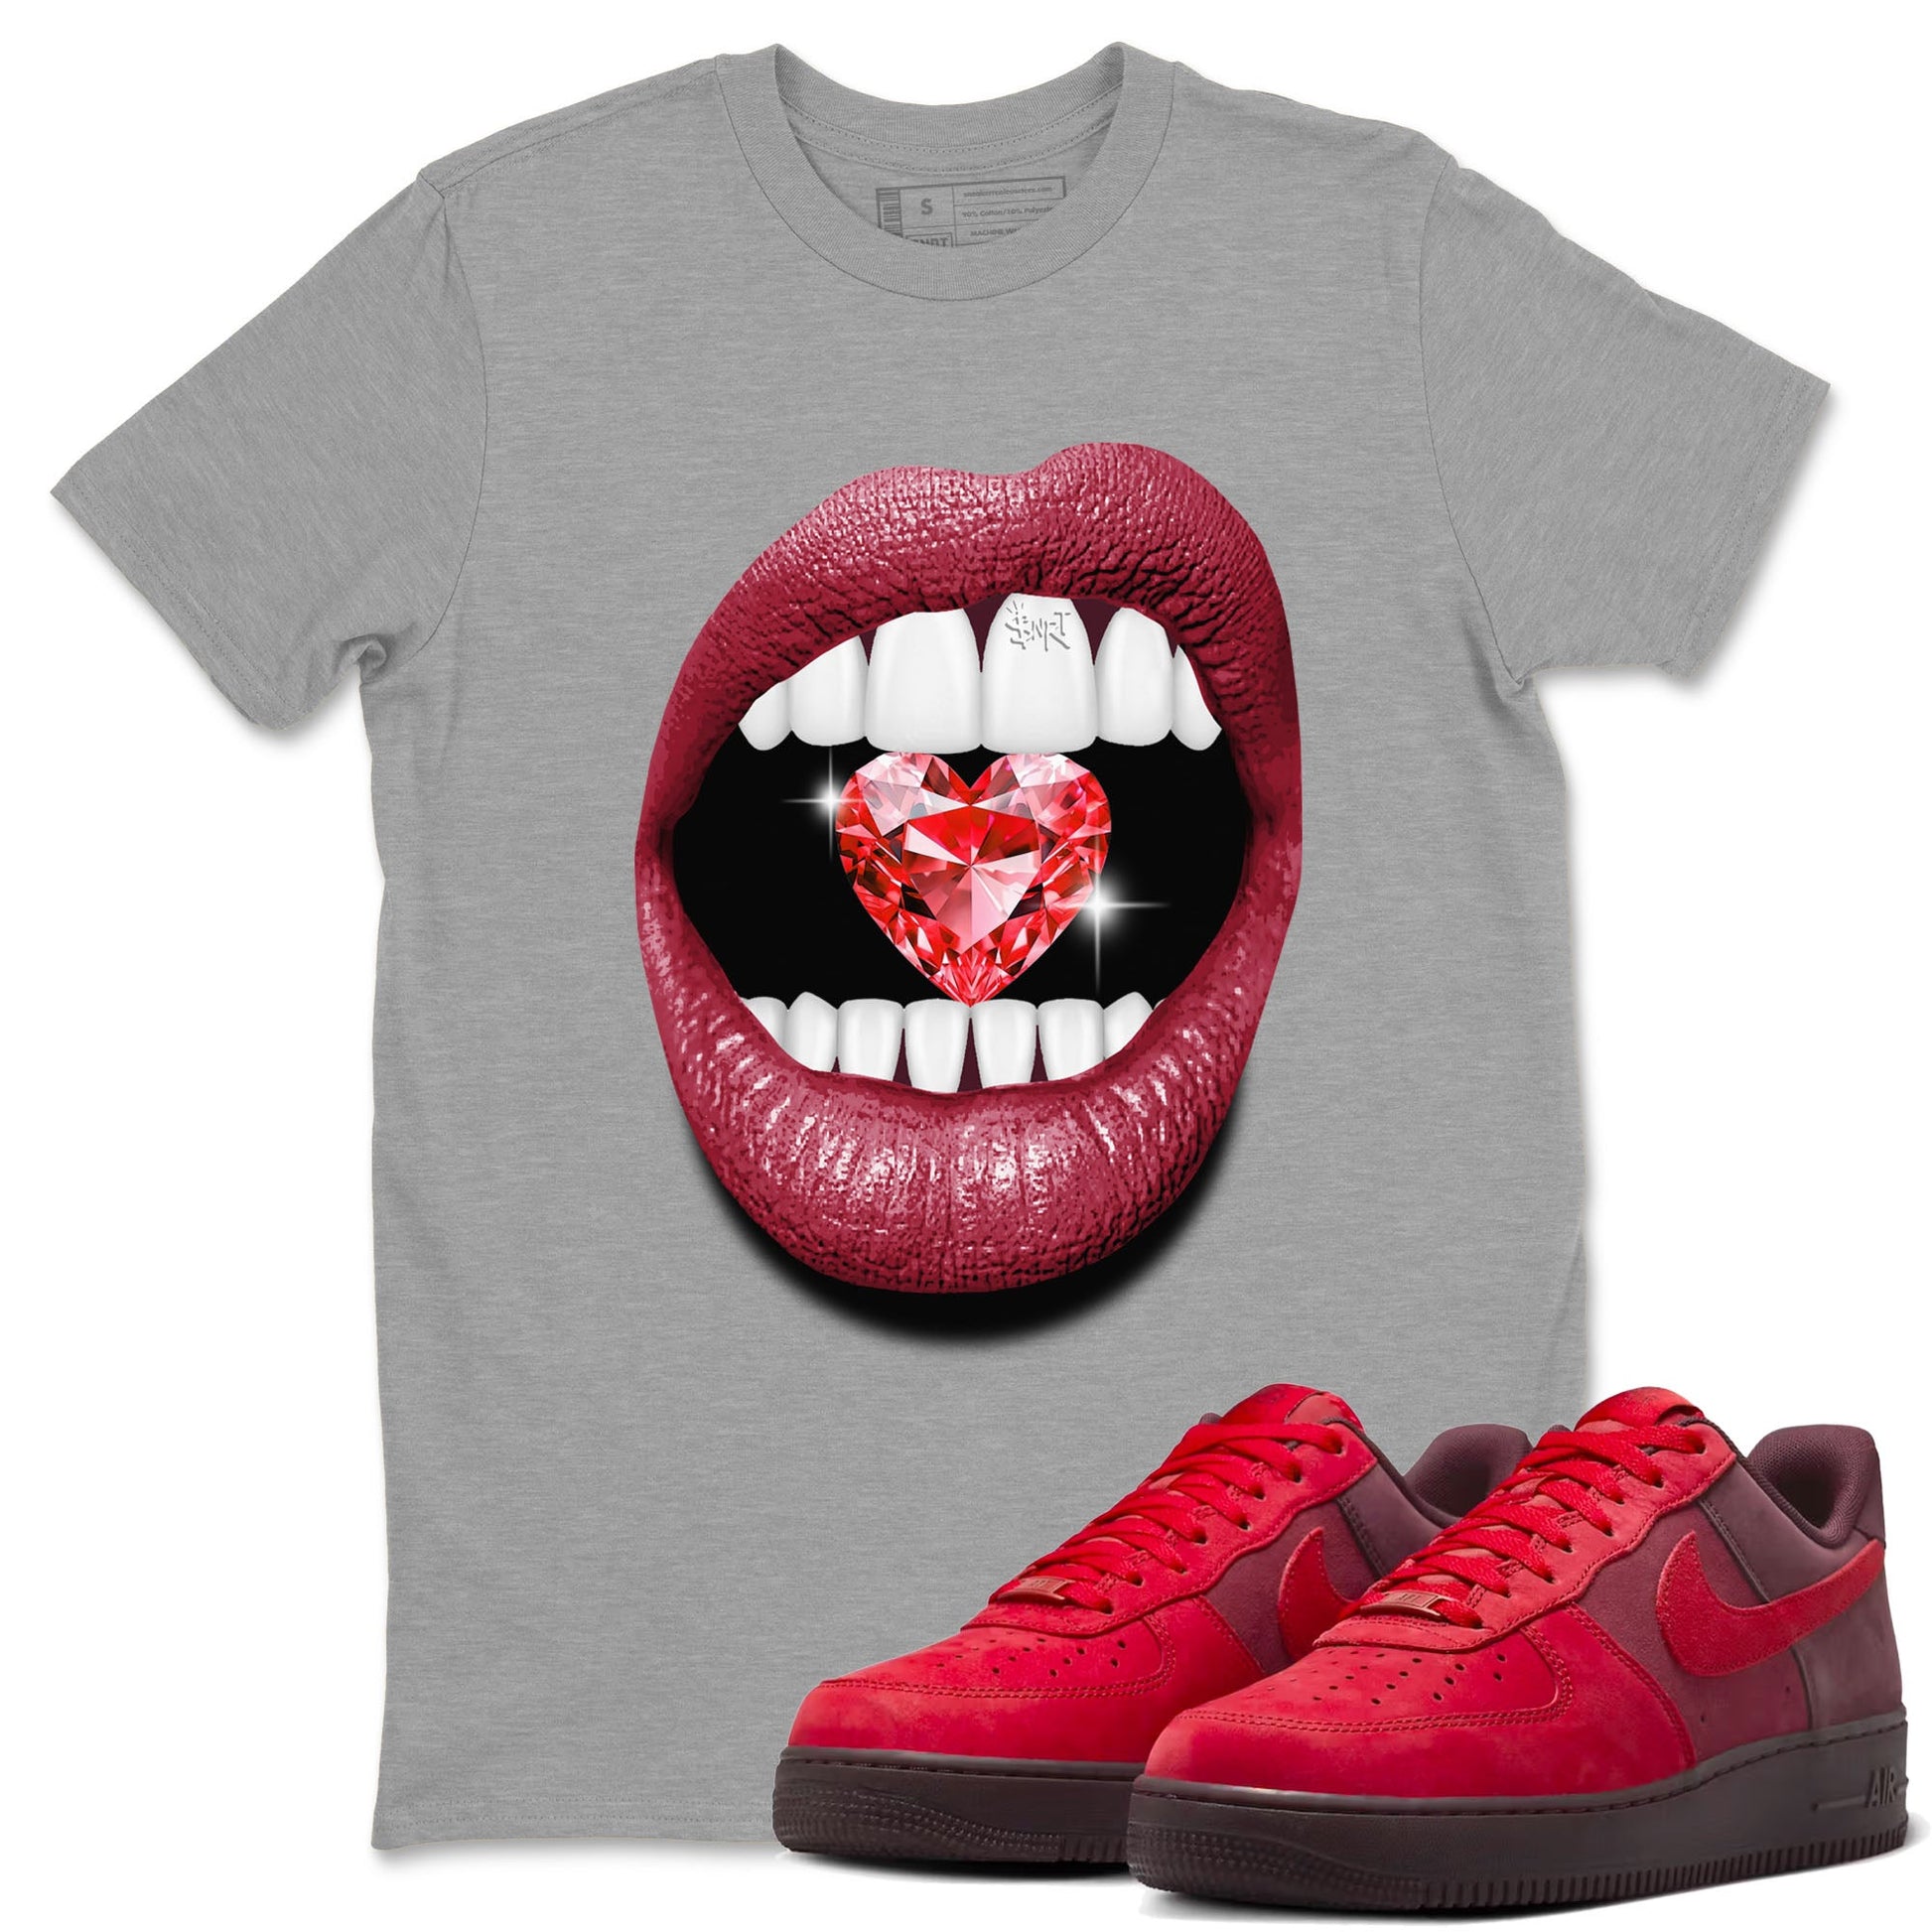 Lips Heart Diamond sneaker match tees to Special Valentine's Day street fashion brand for shirts to match Jordans SNRT Sneaker Tees Air Force 1 Valentines Day unisex t-shirt Heather Grey 1 unisex shirt